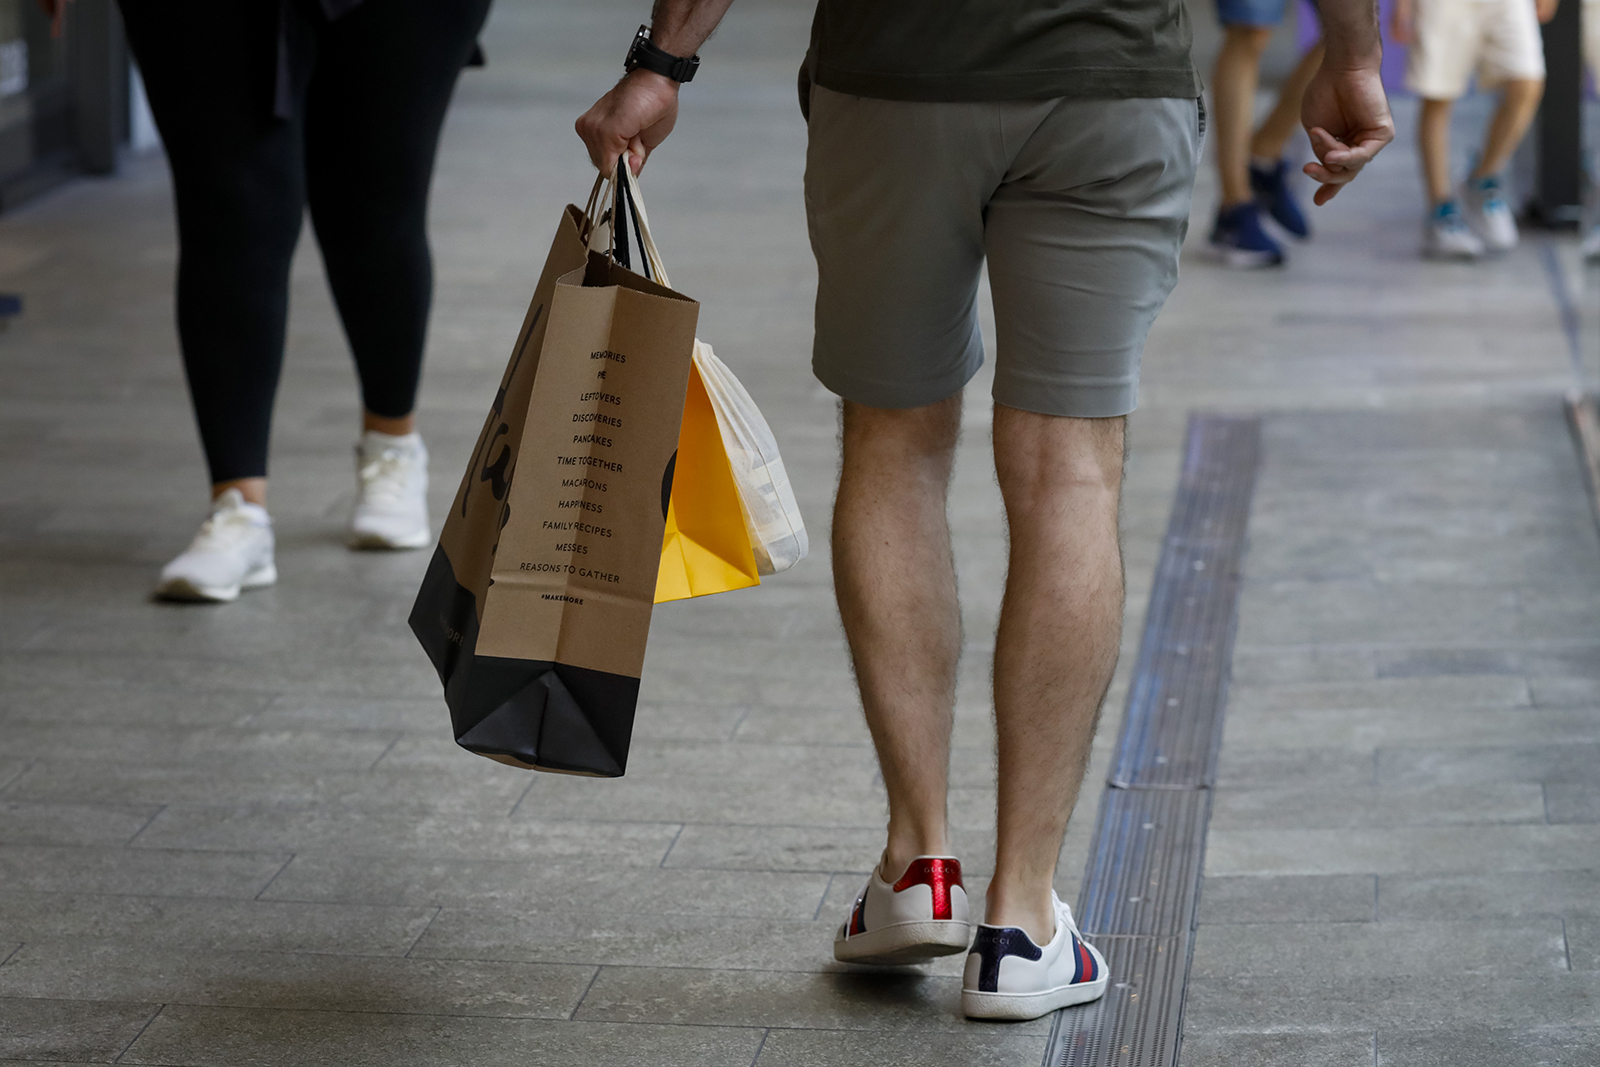 A shopper carries retail bags in Miami, Florida, on June 14.